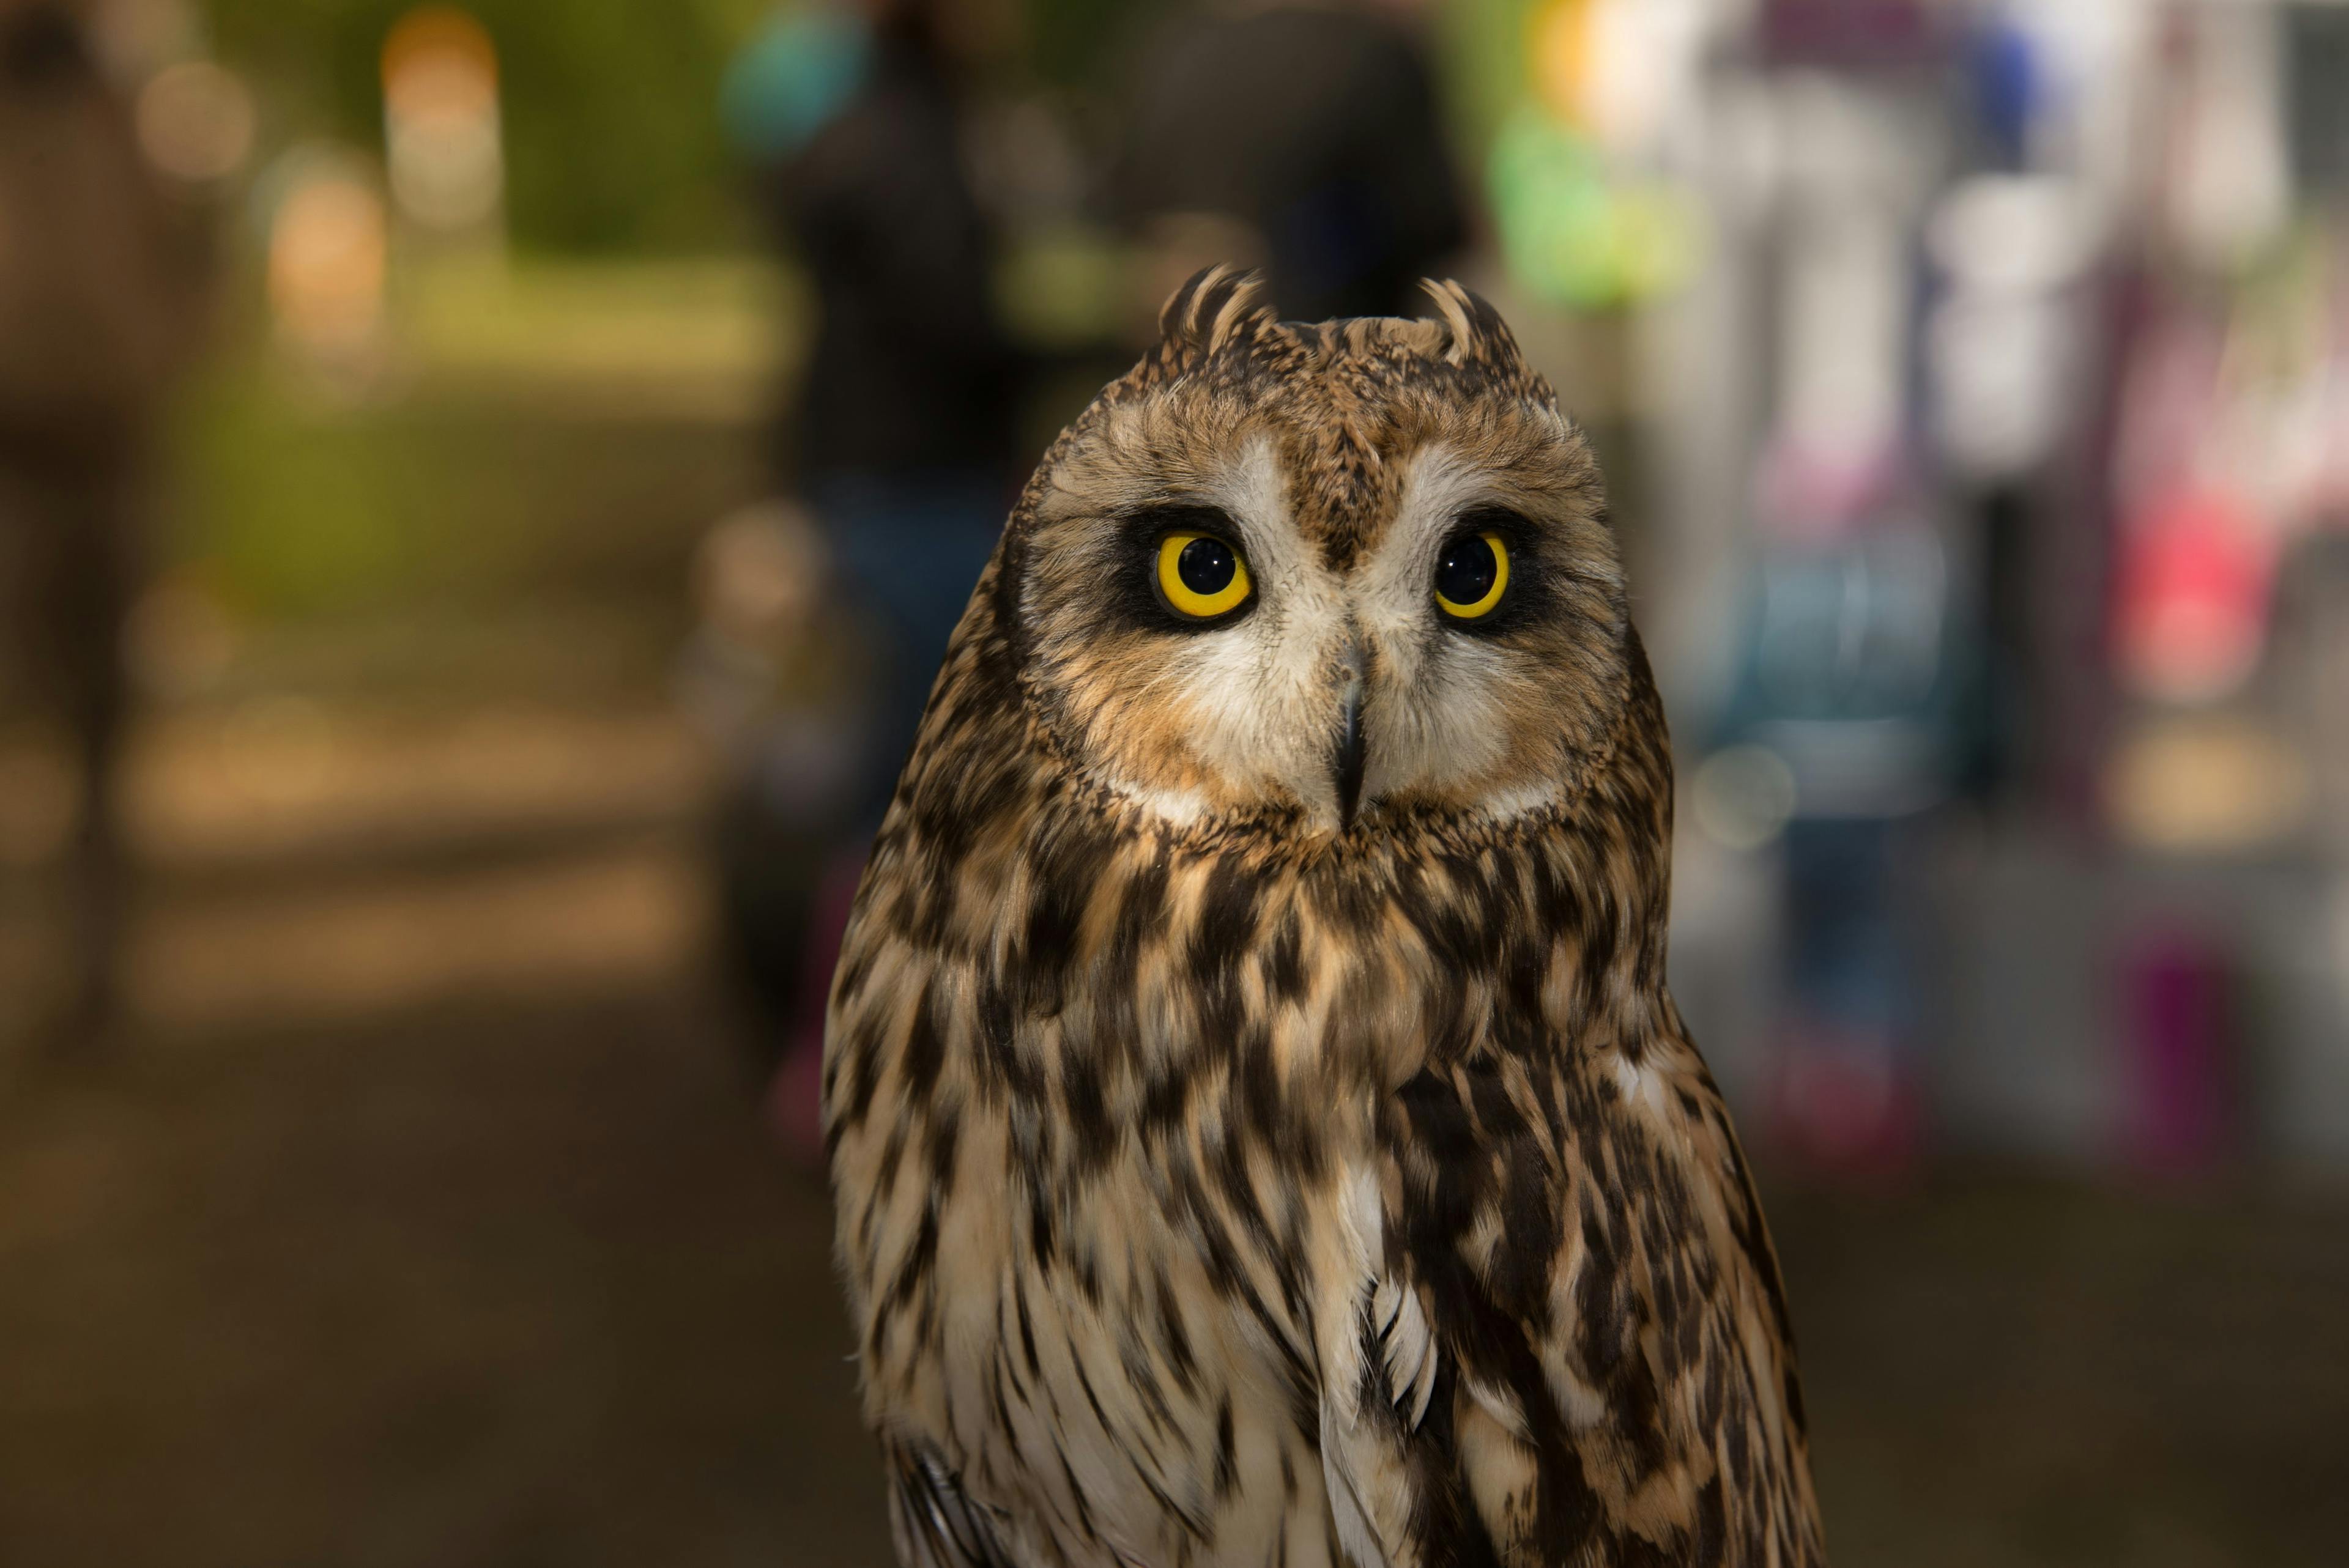 Brown owl with yellow eyes. Blurred city lights in the background.